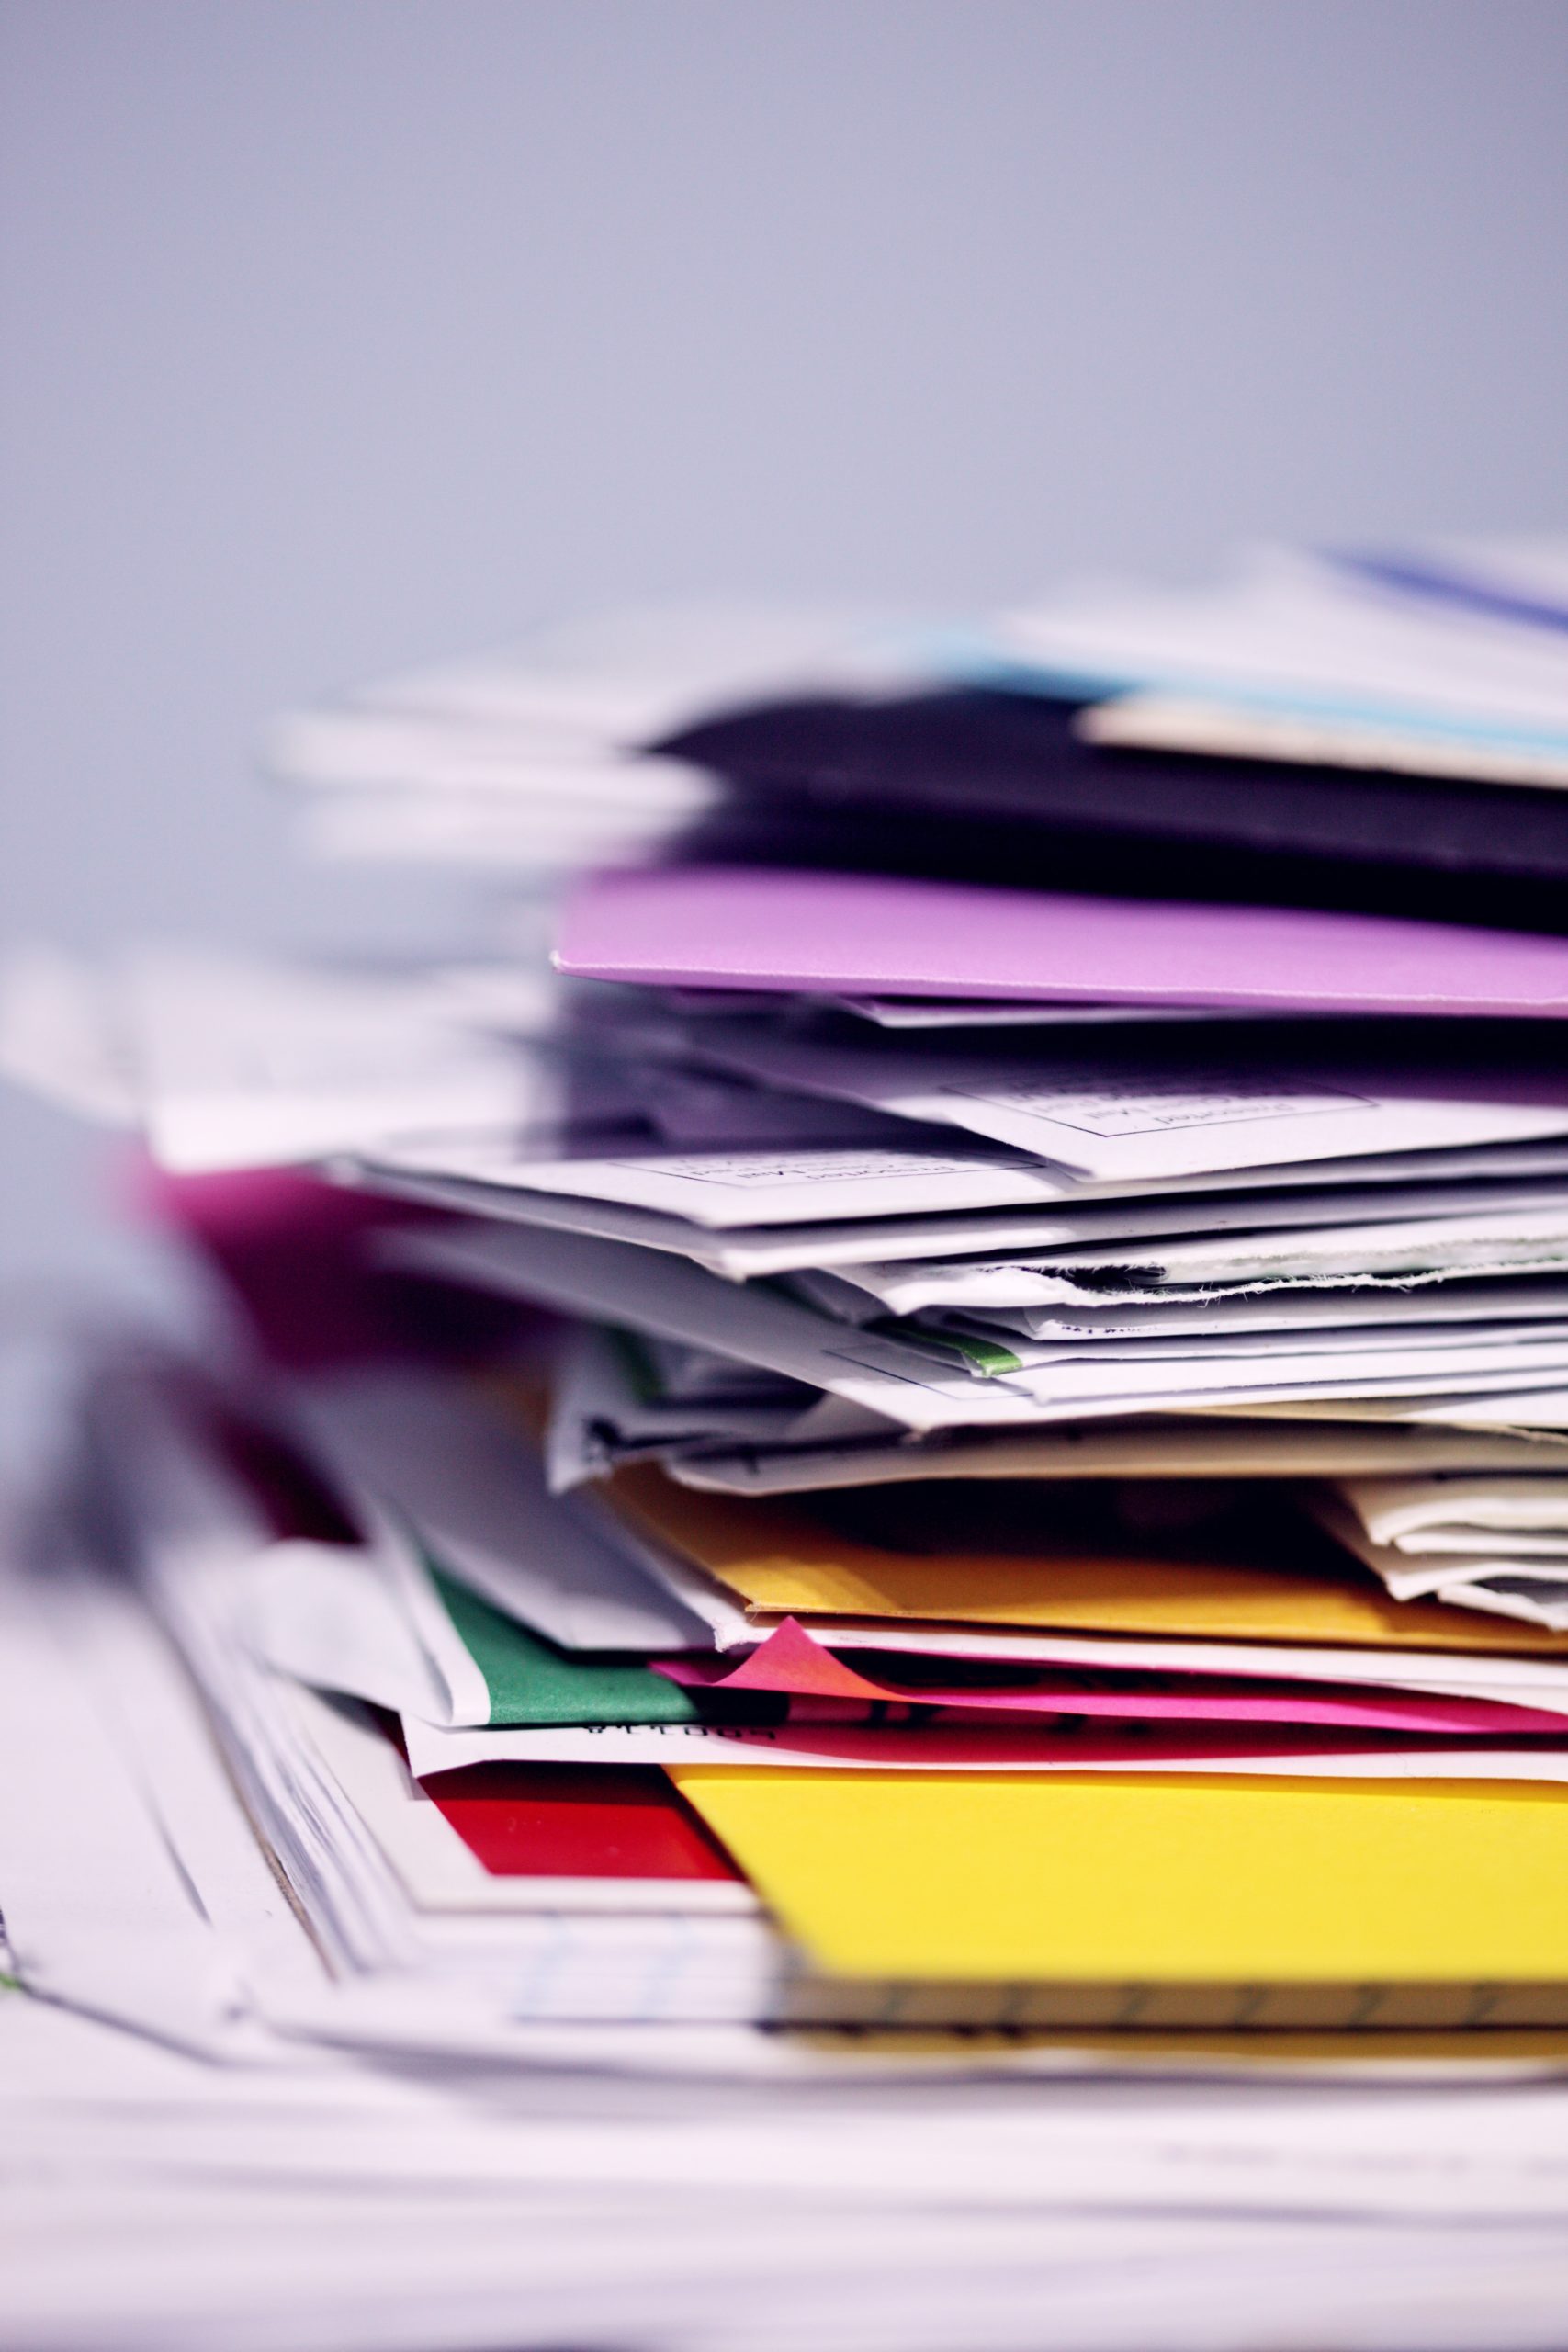 Messy stack of papers and documents falling out of multi-colored file folders